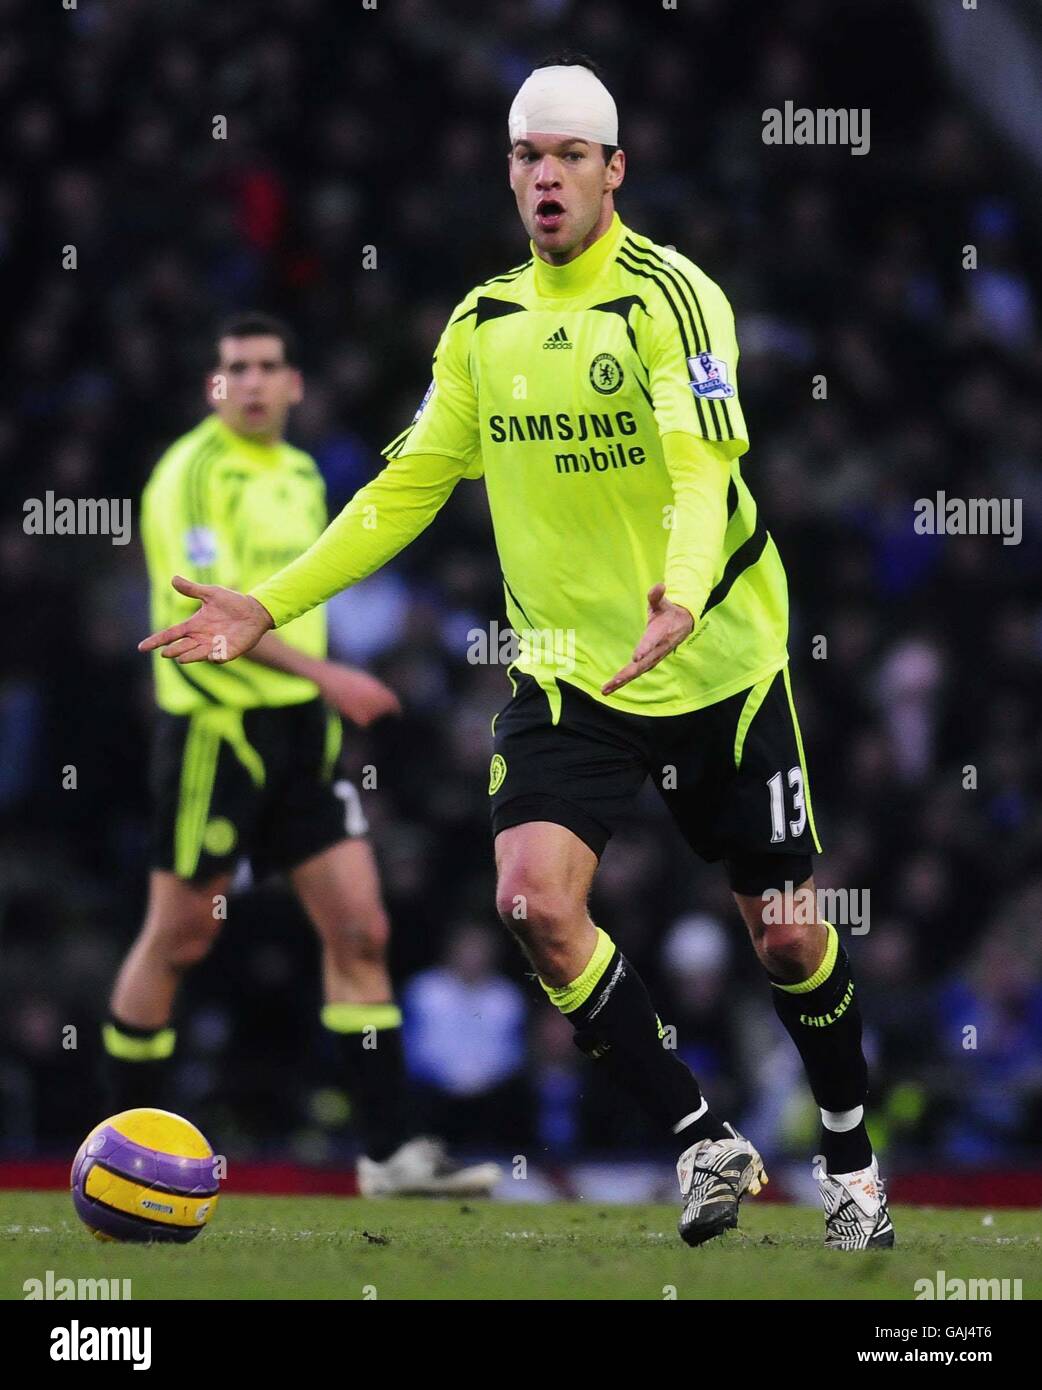 Chelsea's Michael Ballack in action during the Barclay's Premier League match at Fratton Park, Portsmouth. Stock Photo